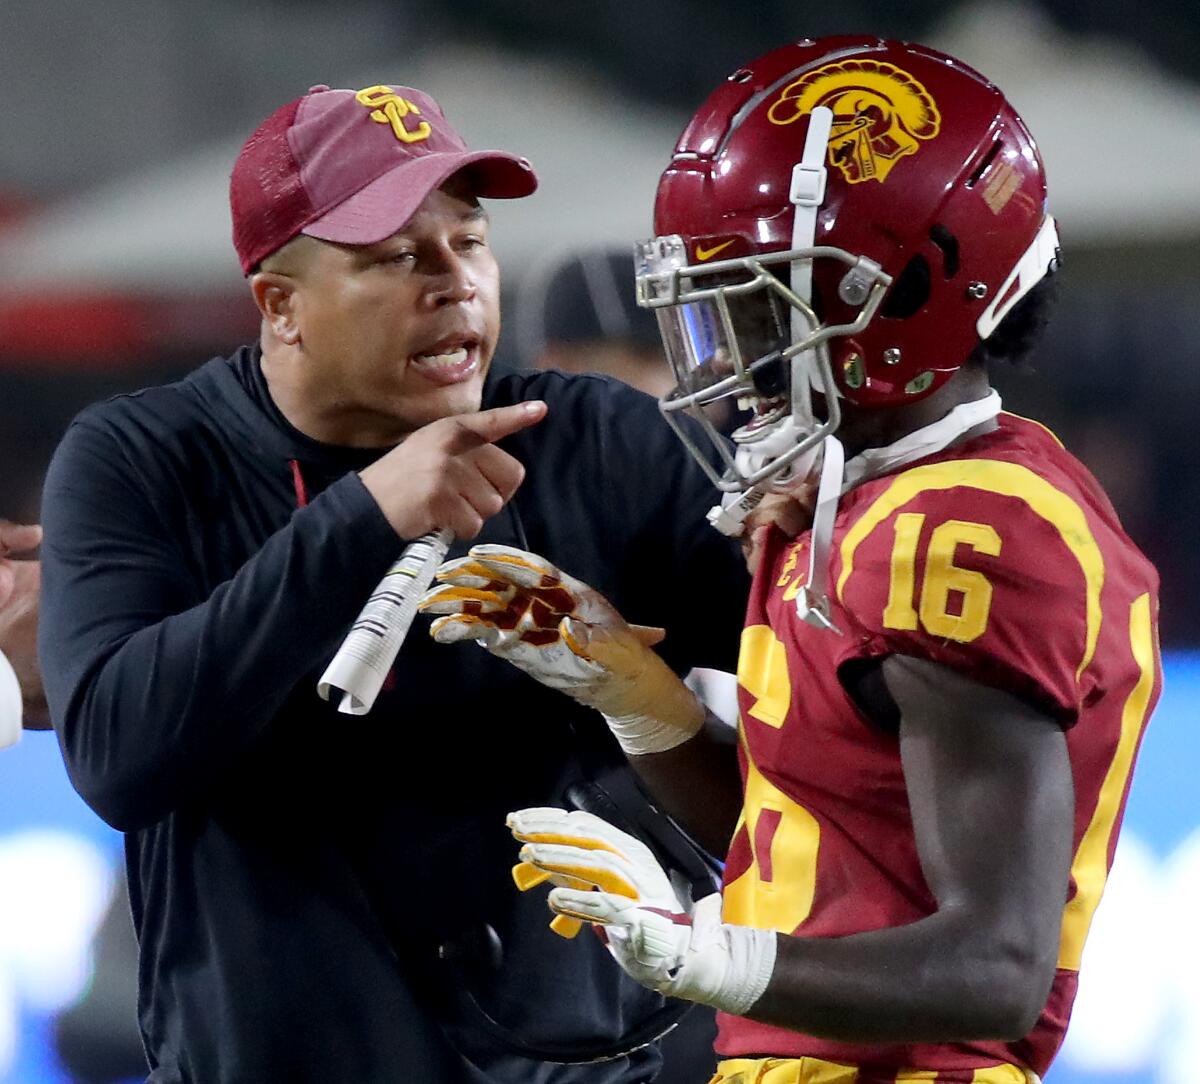 USC interim coach Donte Williams, left, speaks with receiver Tahj Washington during a win over Arizona on Oct. 30.